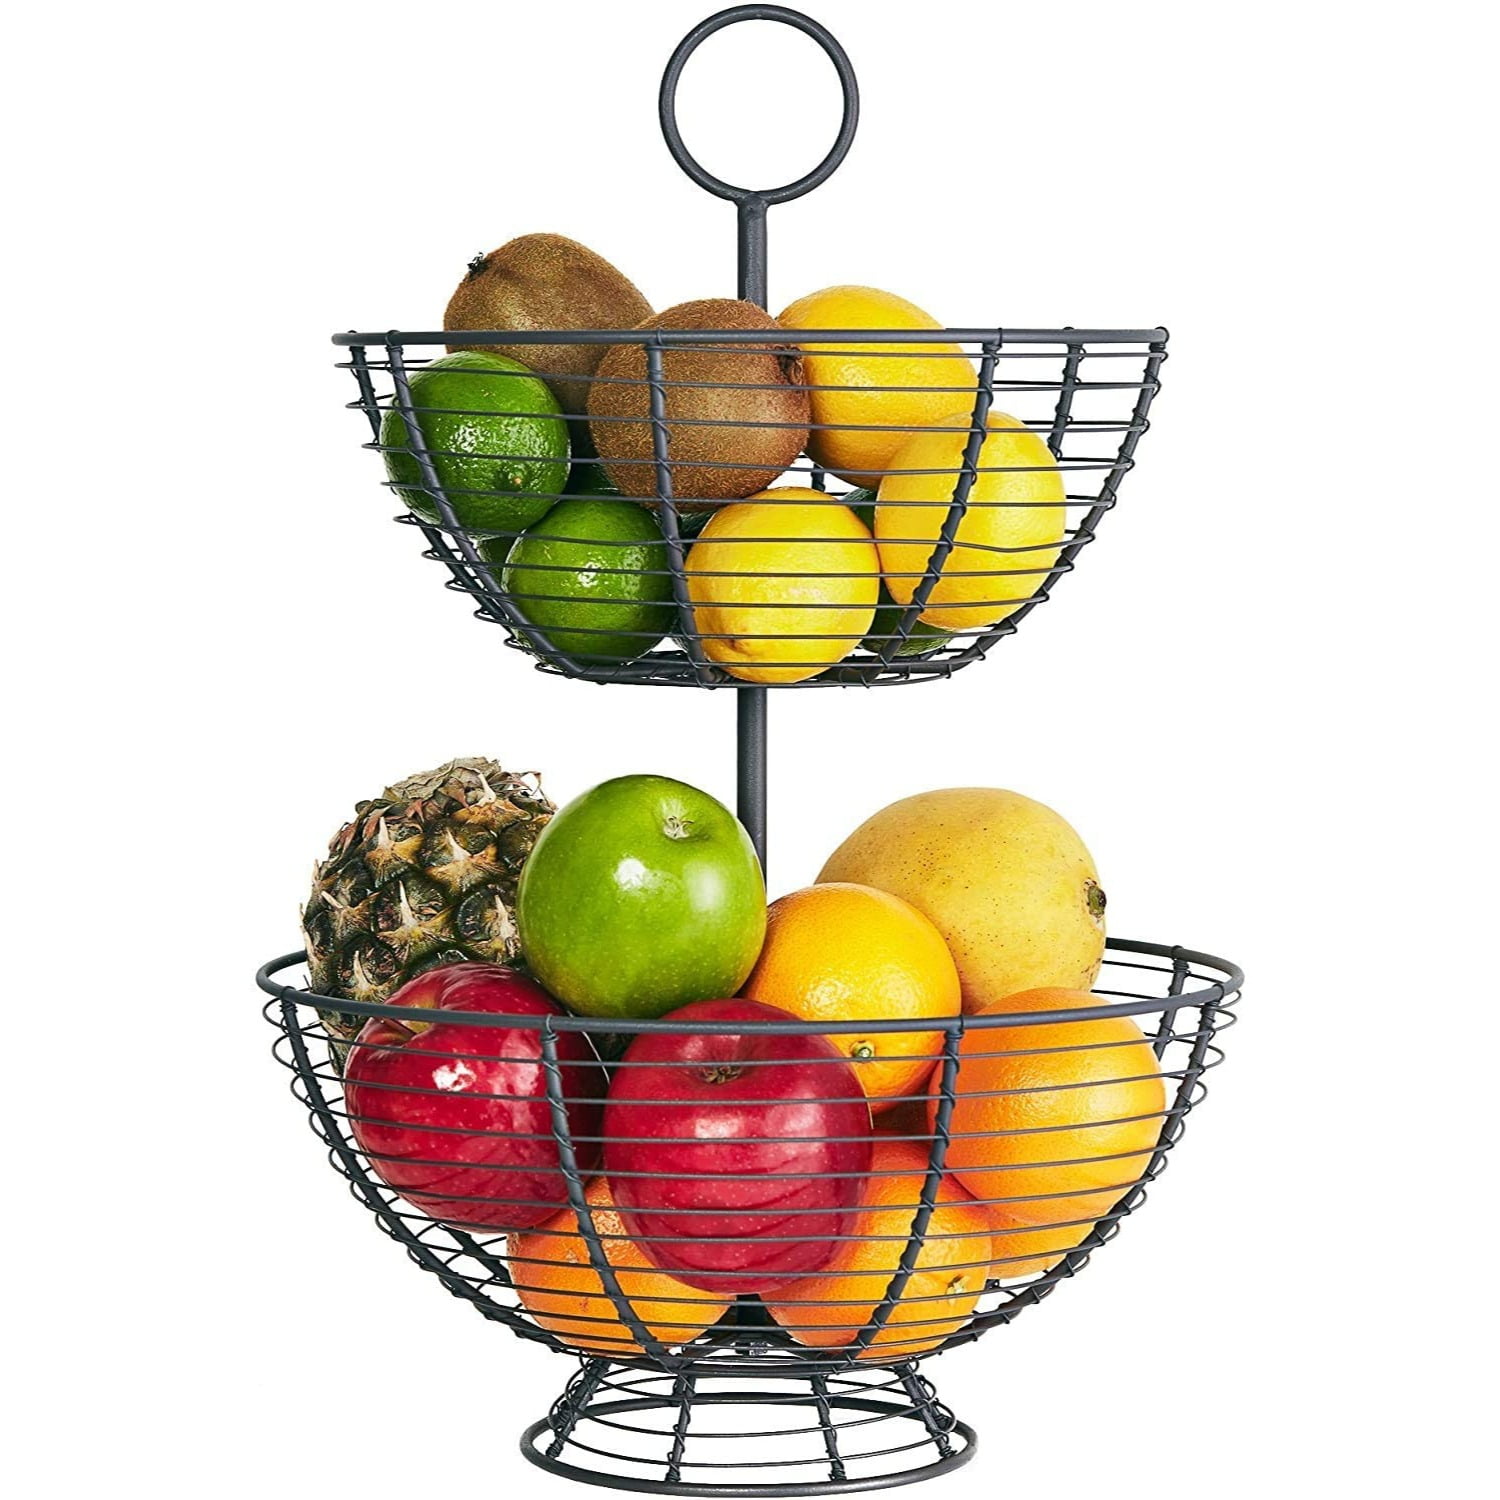 Eggs Snacks and More Auledio 3-Tier Countertop Hanging Fruit Vegetables Basket Bowl Storage Holder for Storing Organizing Bread 